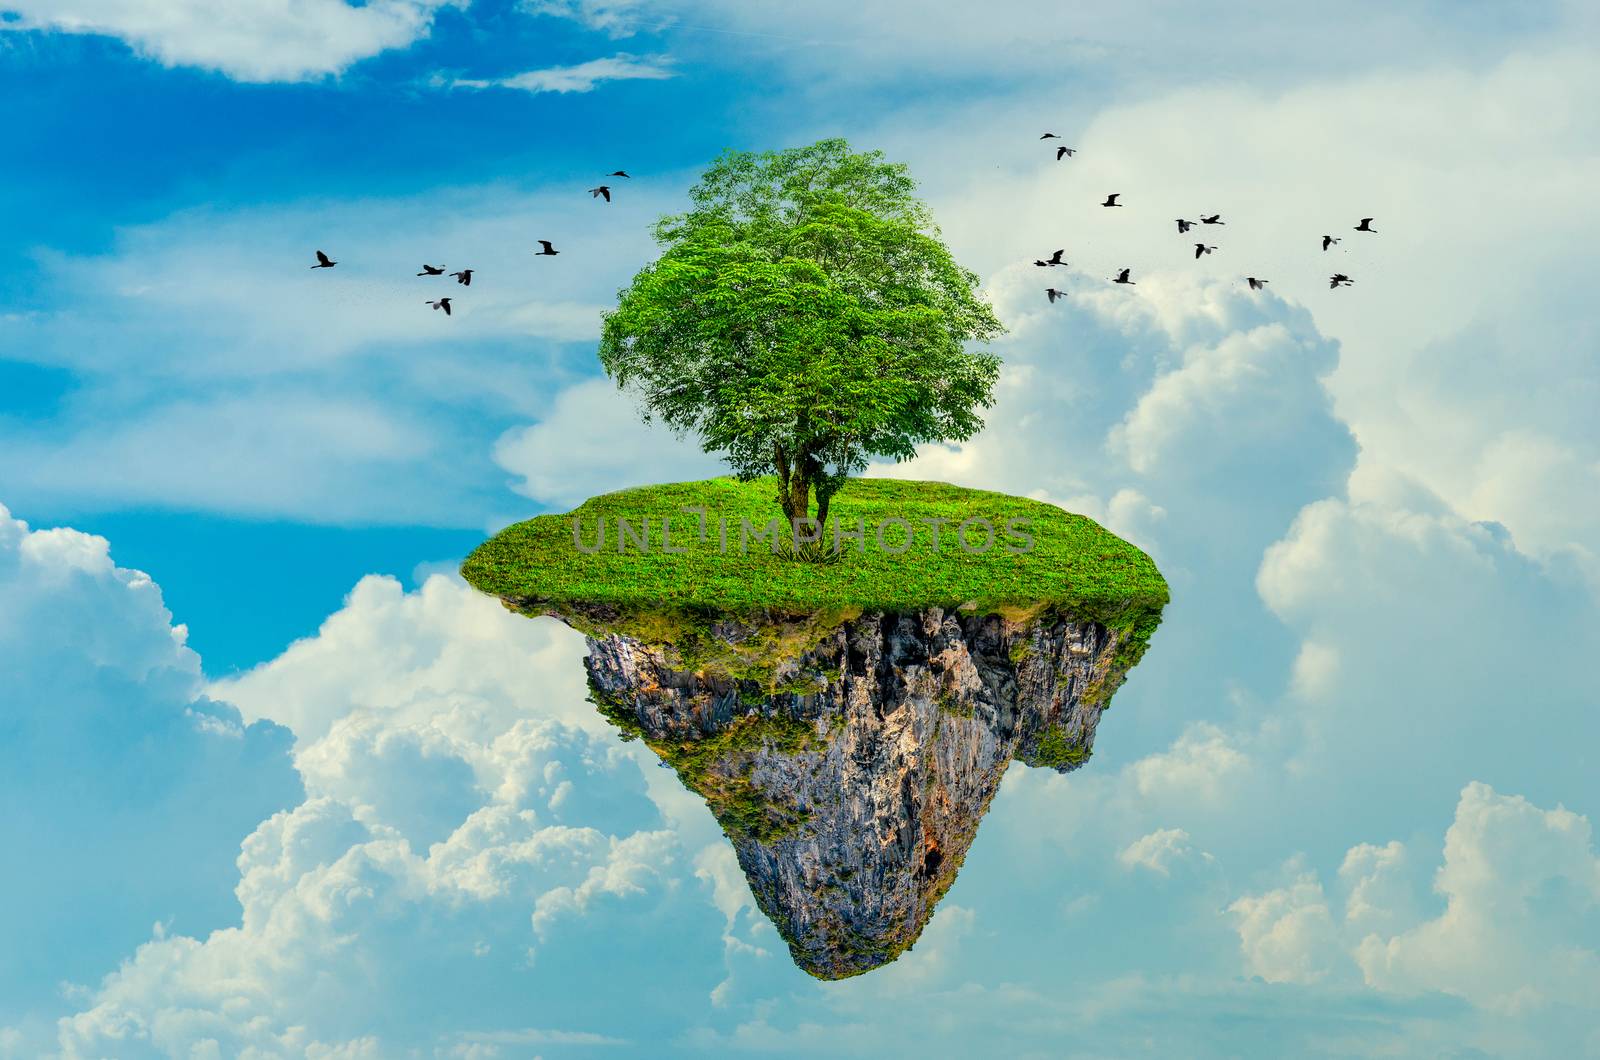 The island floats in the sky with 1 tree on the island. 3D by sarayut_thaneerat